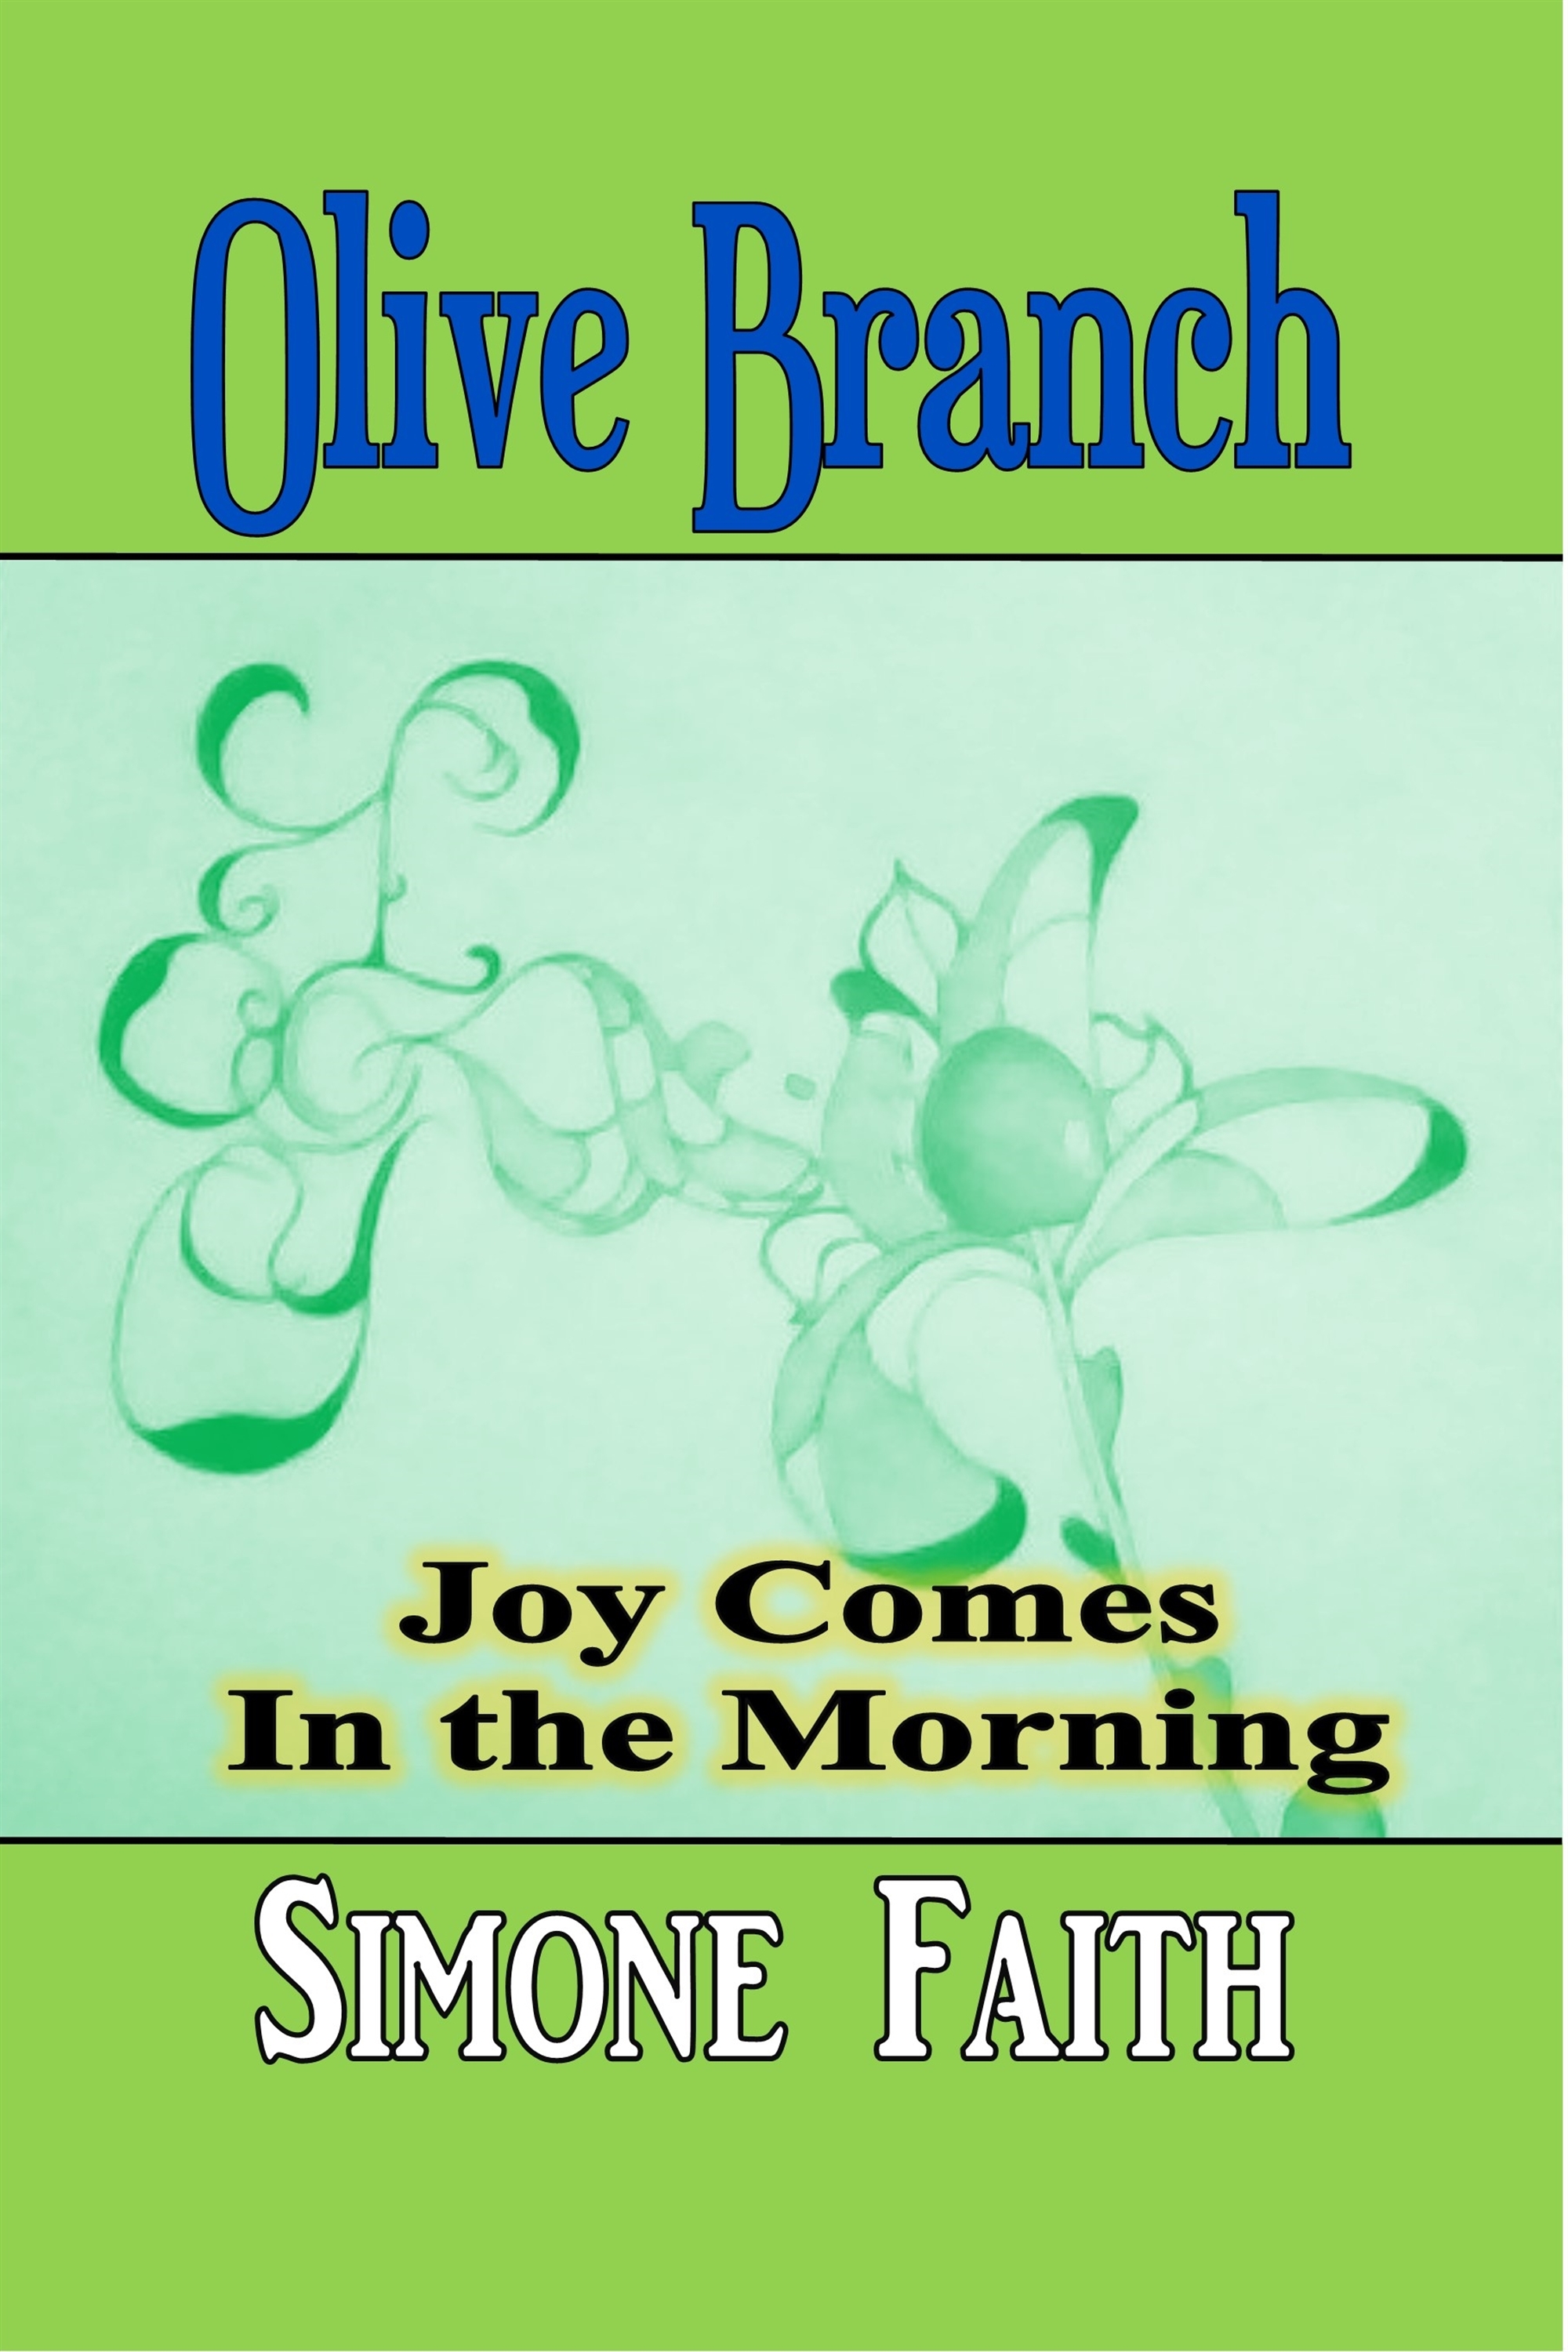 Olive Branch (joy comes in the morning)